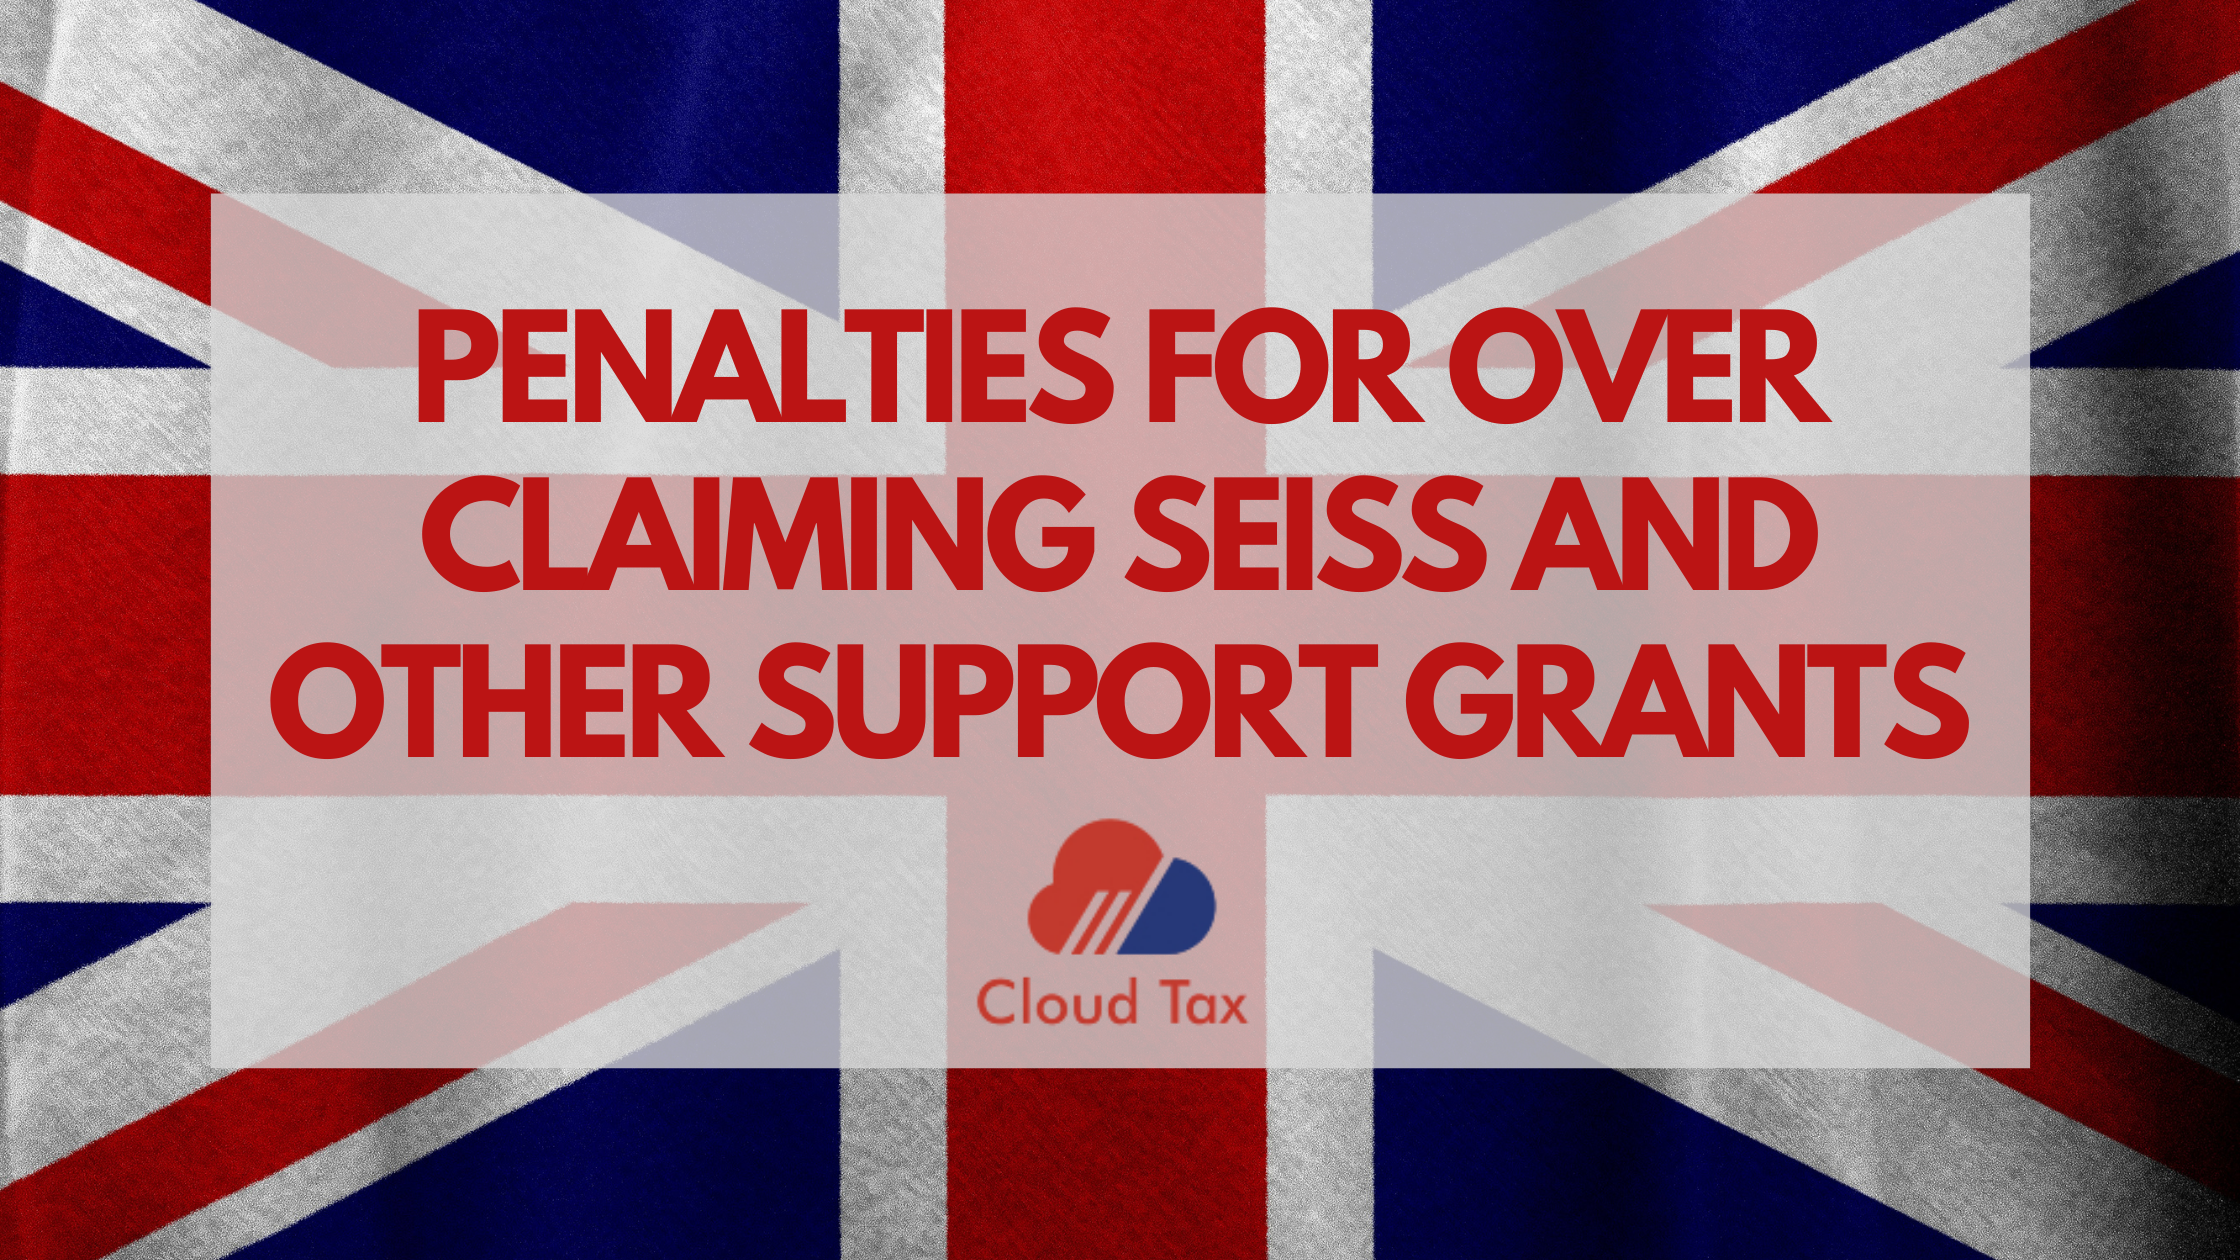 Penalties for over claiming SEISS and other support grants